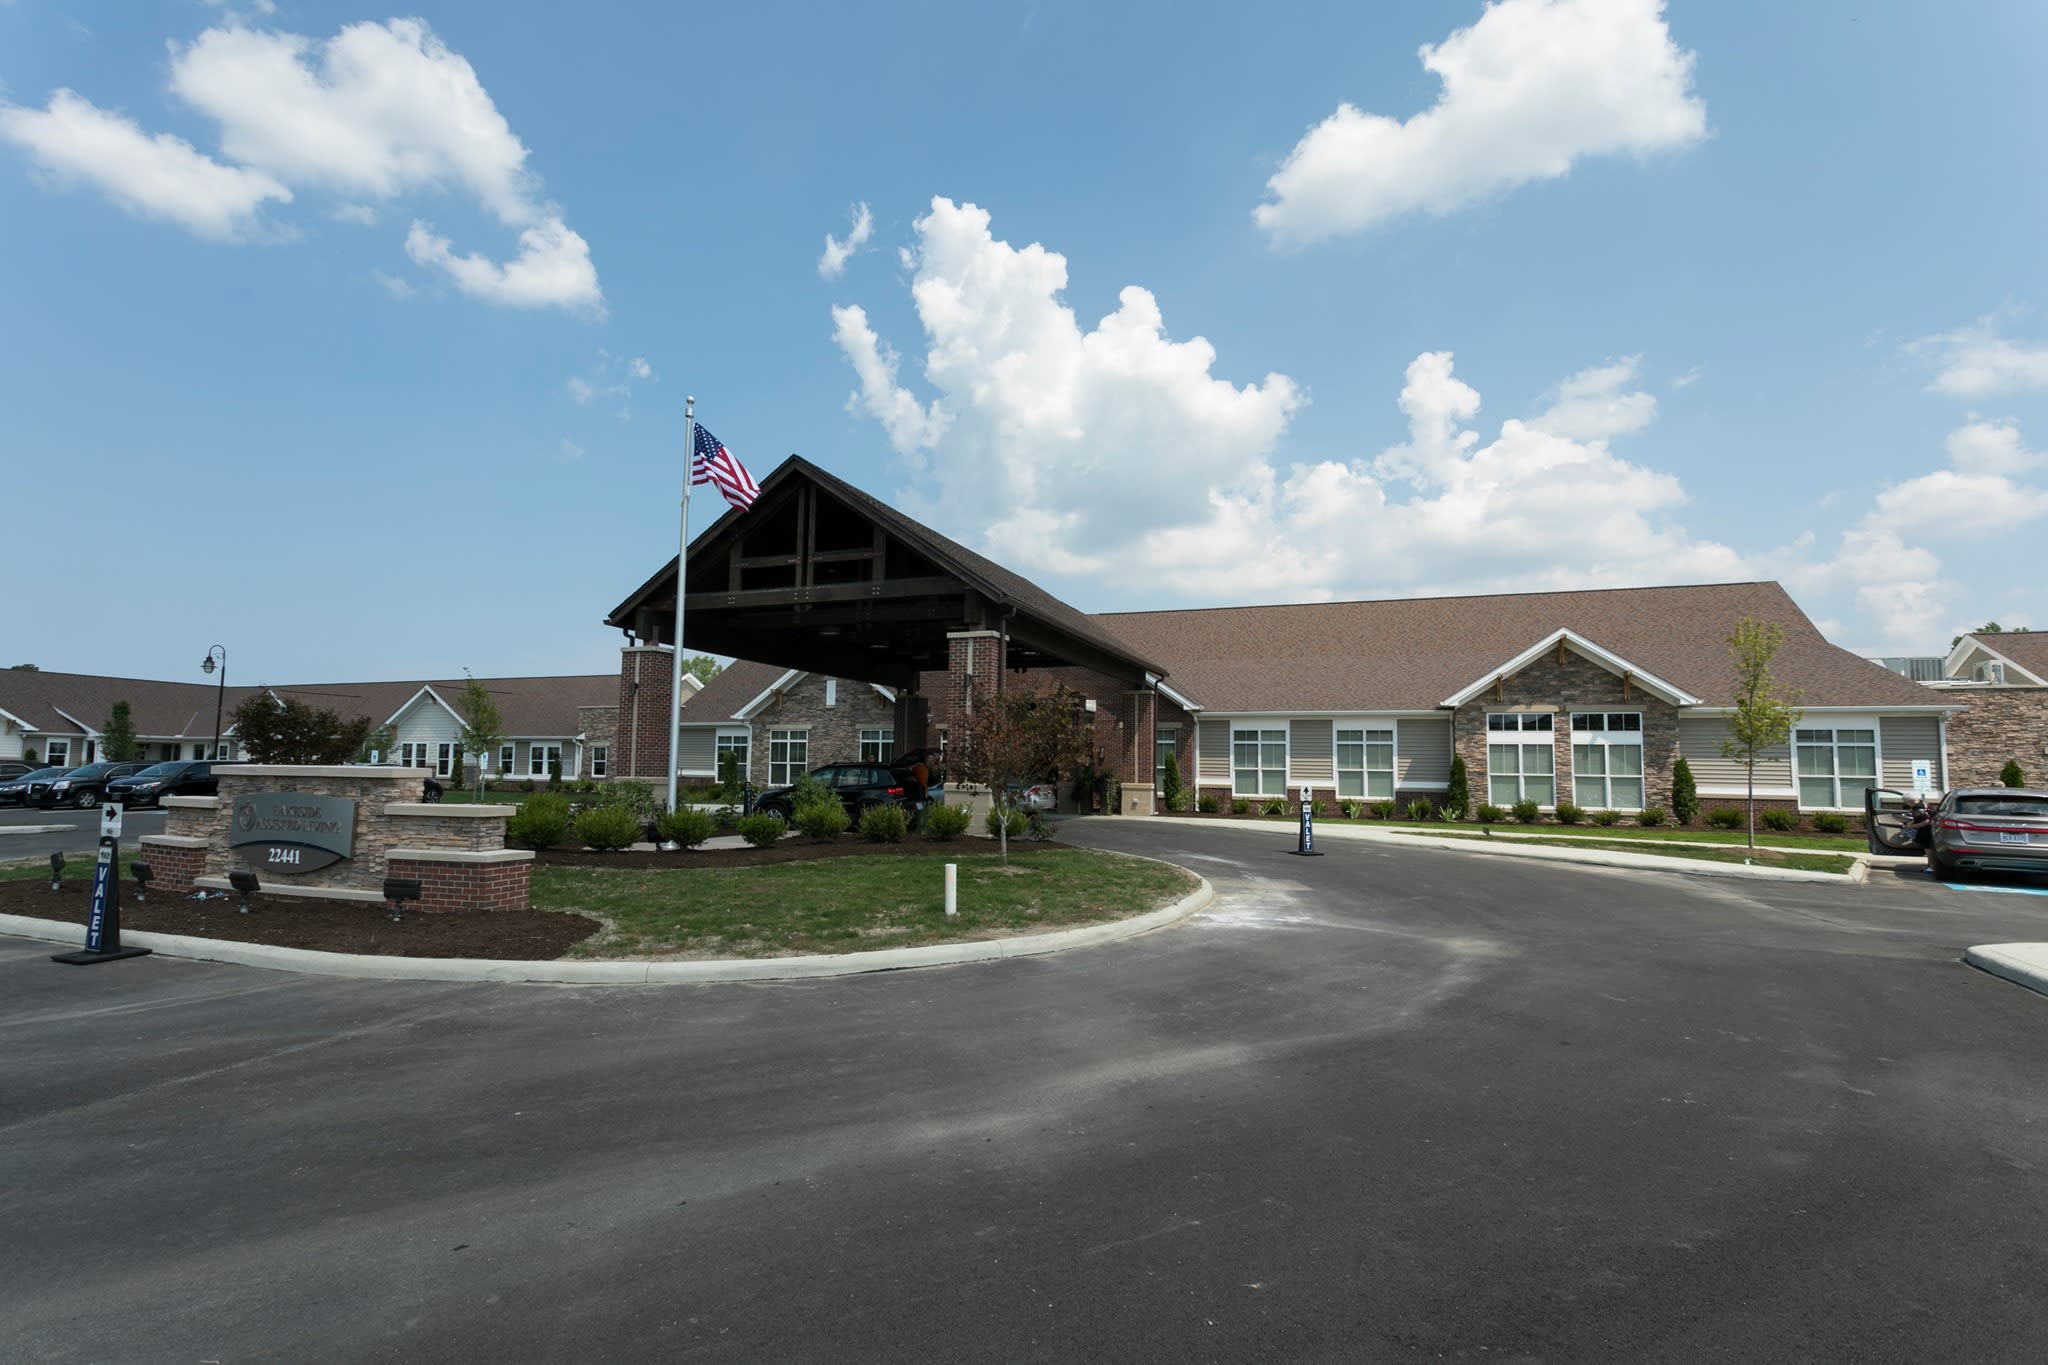 Lakeside Assisted Living at the Normandy community exterior